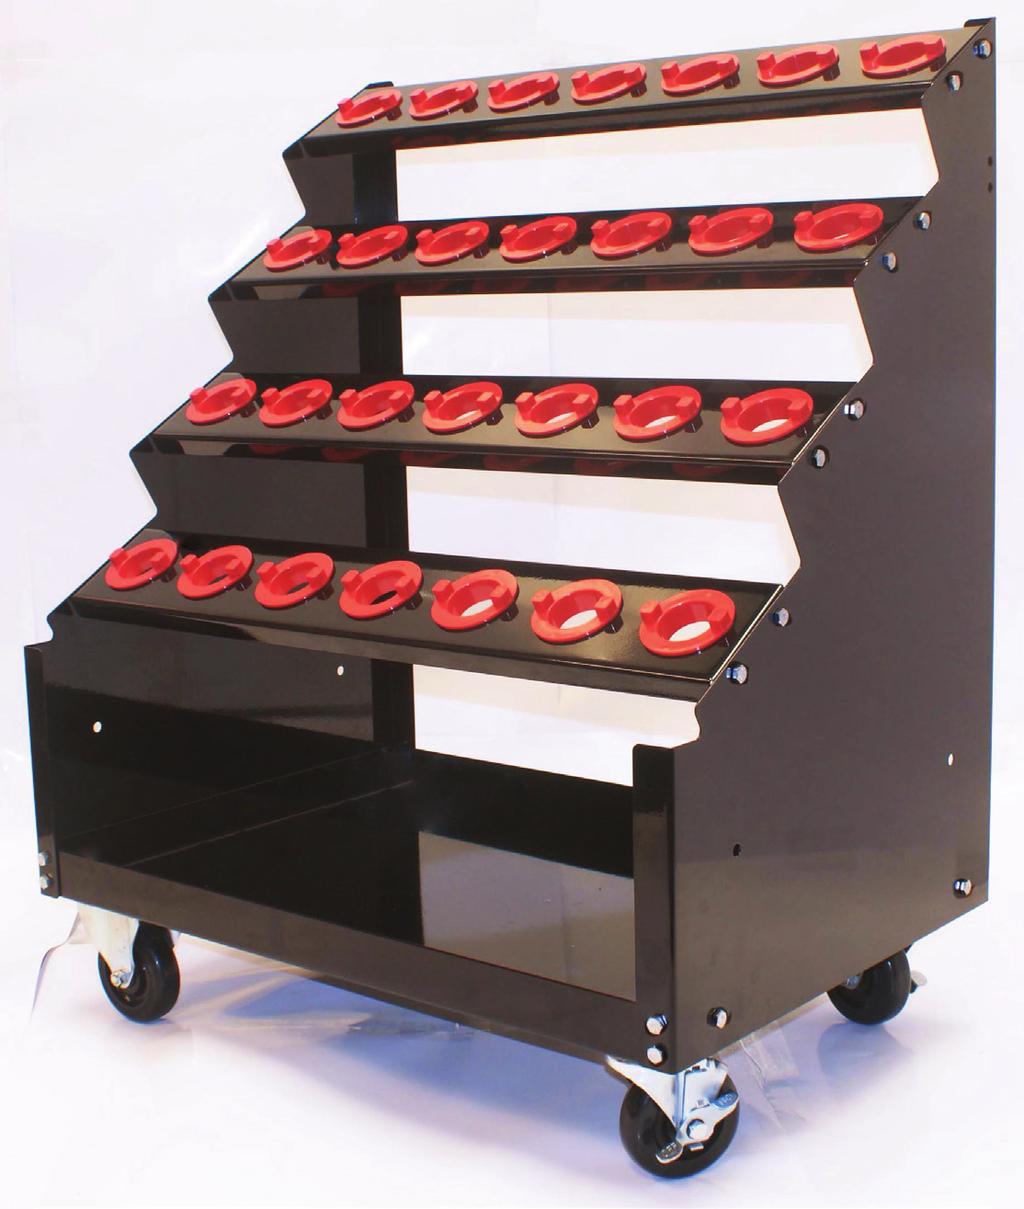 STEPS MODEL, Trays angled at 15 Degree for convenience. Tool cart weight: 66.5 lbs (30 Kg) 37.